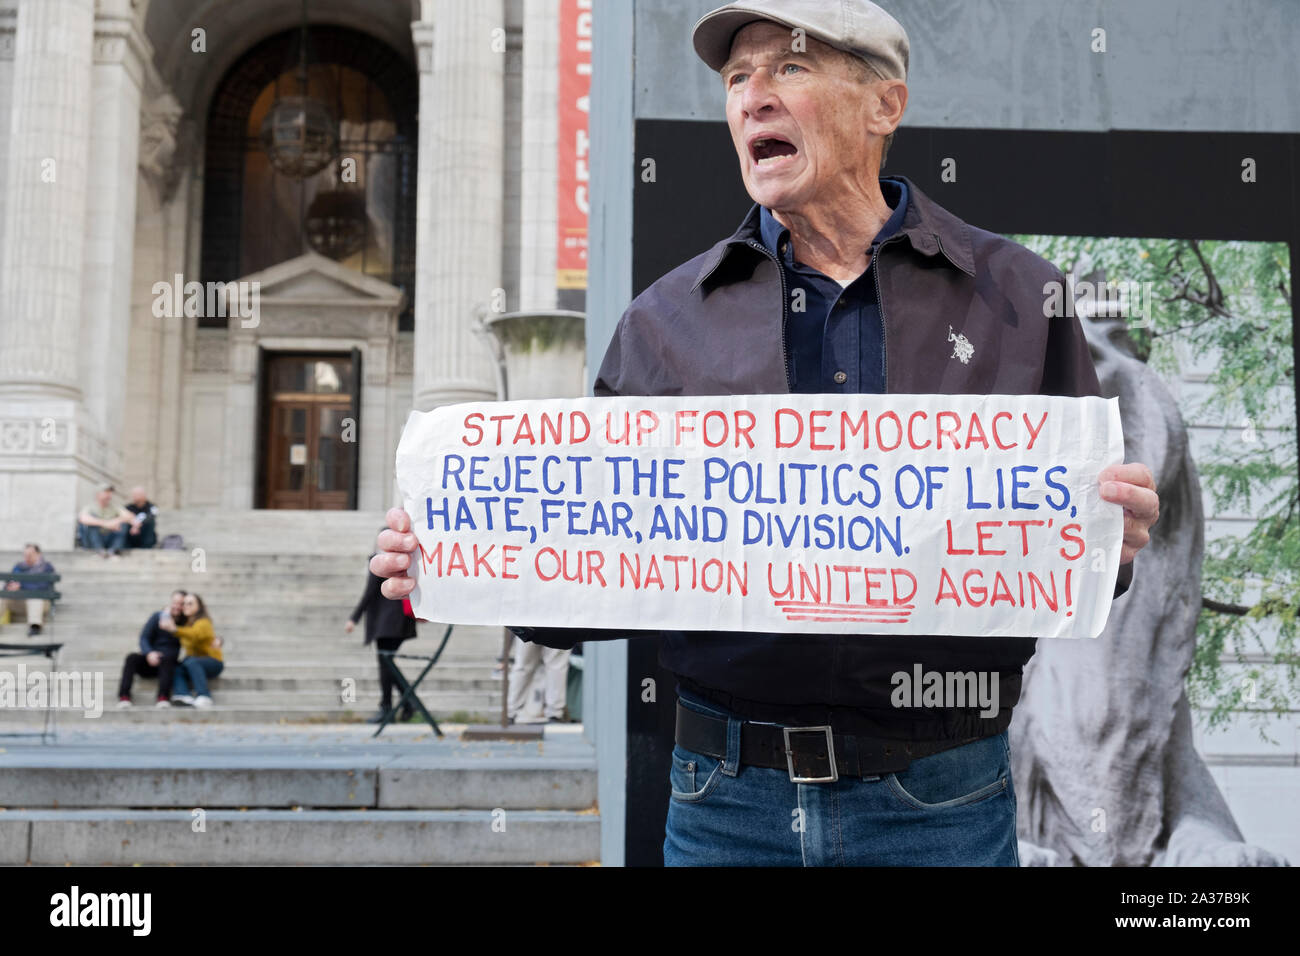 An anti Trump septuagenarian war veteran lectured tourists and passersby bout democracy. In front of the Main Library on Fifth Ave in Midtown, NYC. Stock Photo